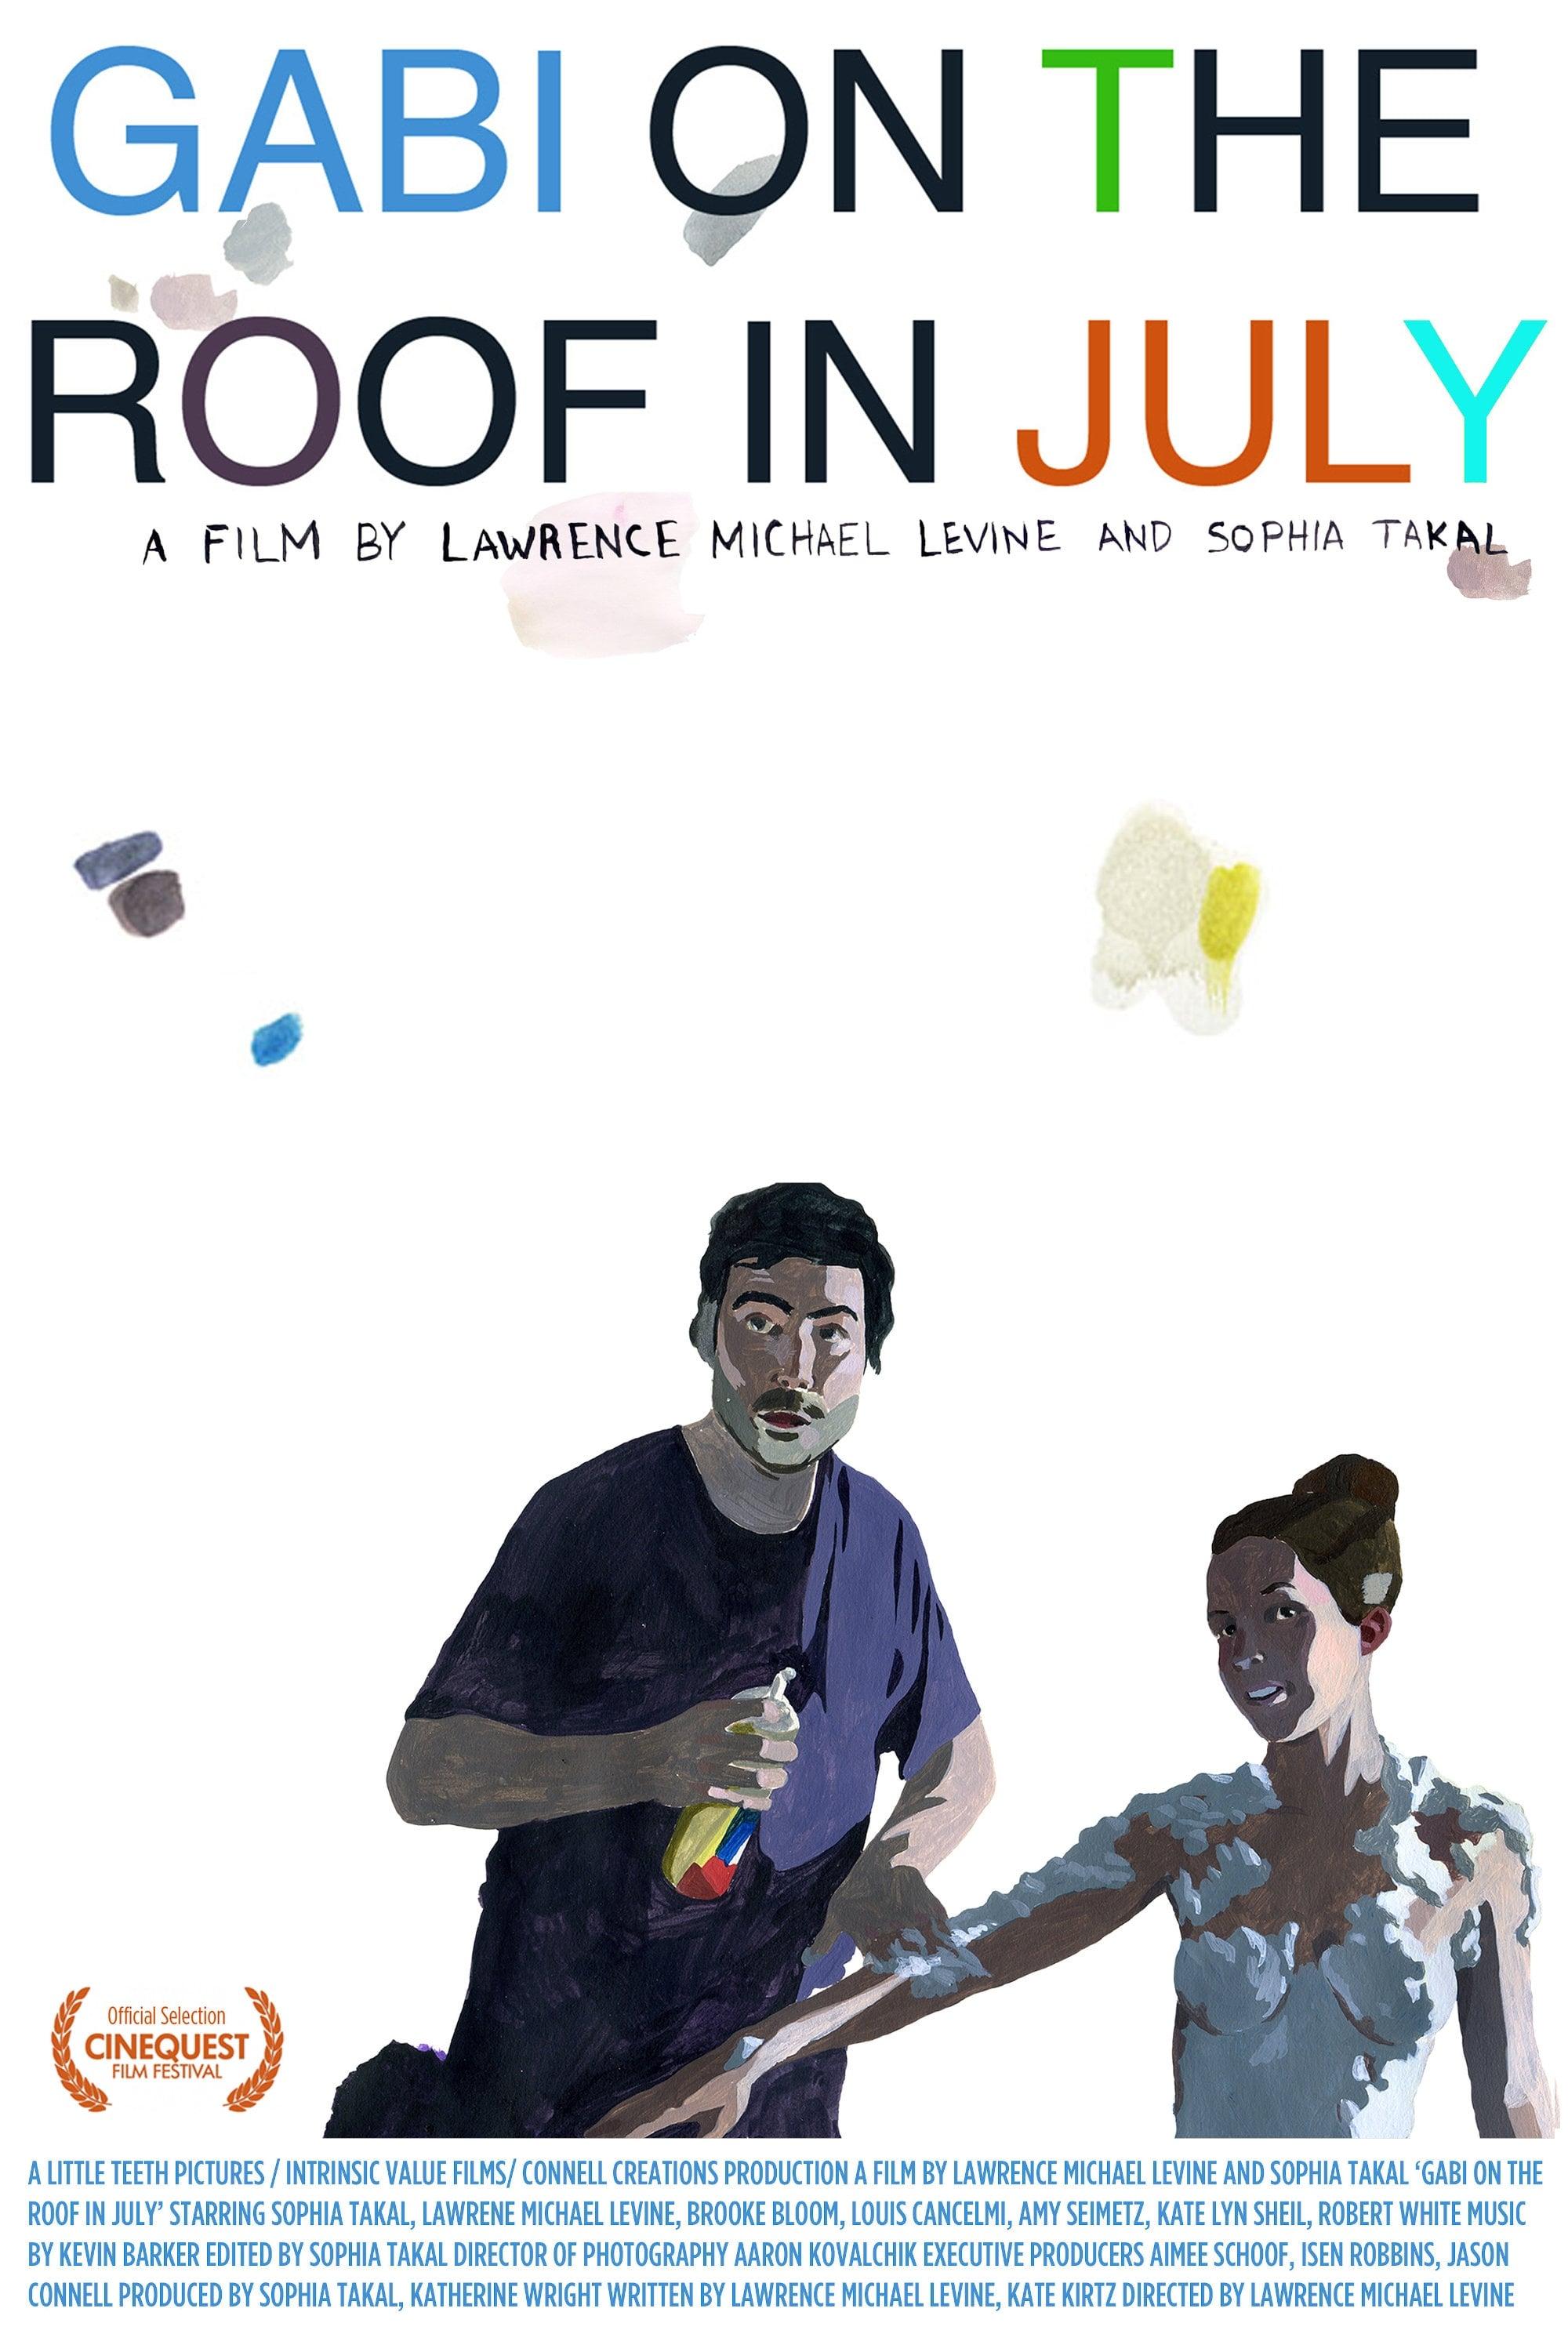 Gabi on the Roof in July poster